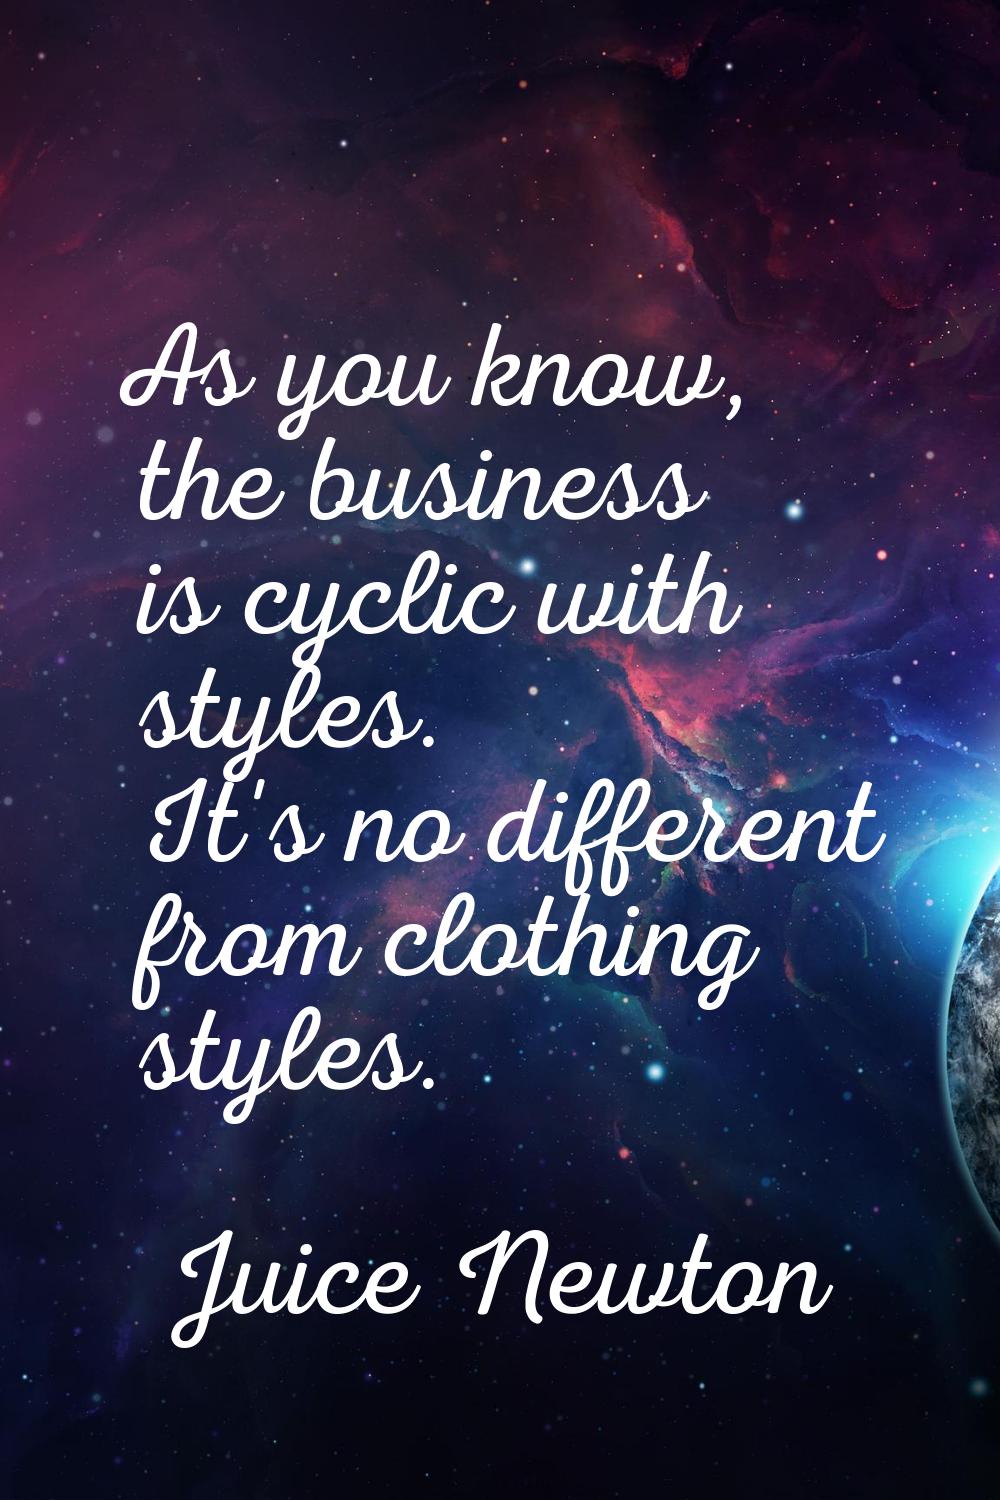 As you know, the business is cyclic with styles. It's no different from clothing styles.